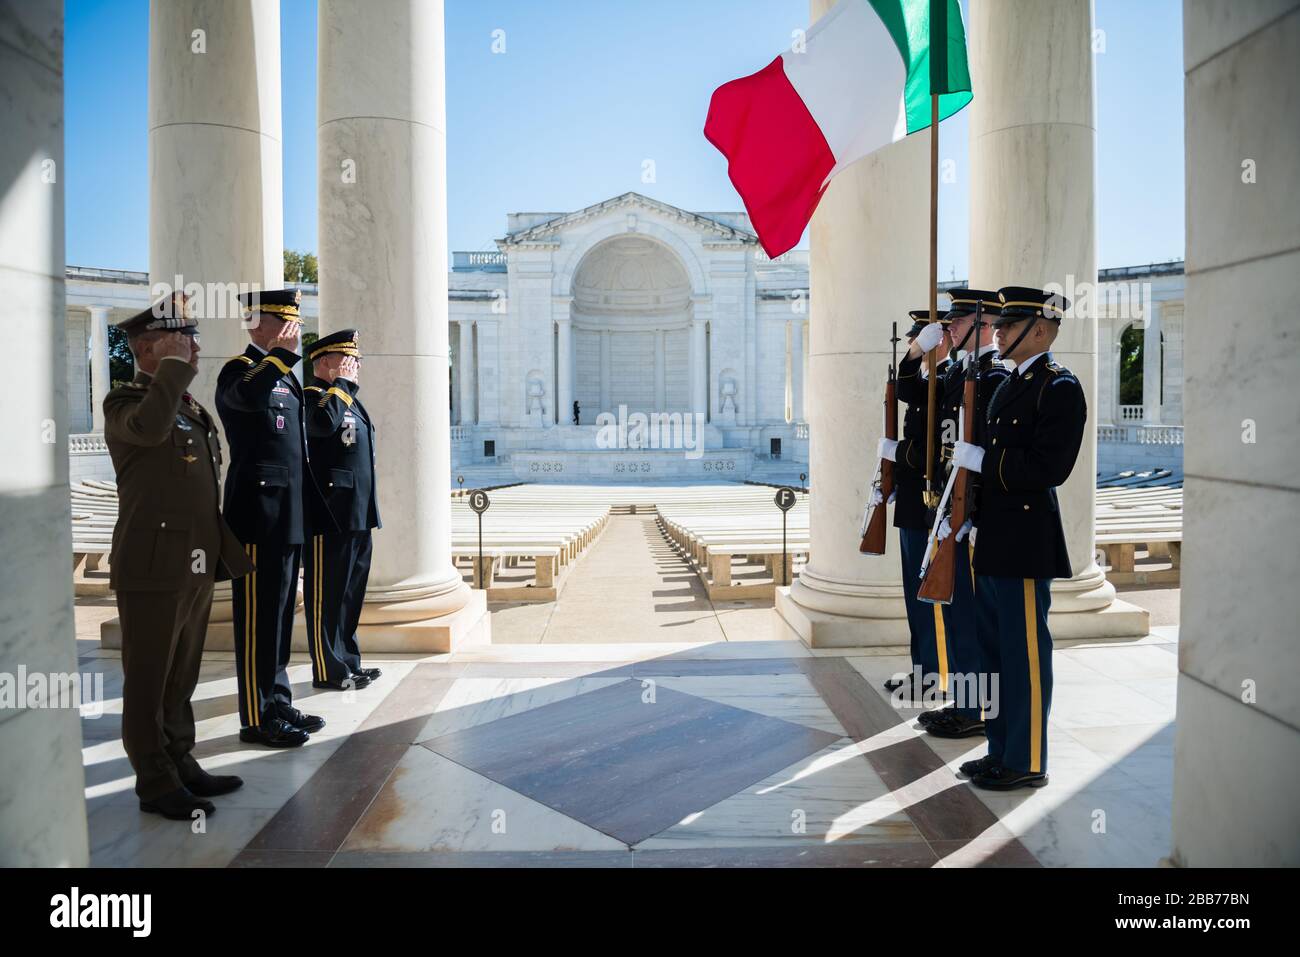 '(From the left) Lt. Gen. Danilo Errico, chief of staff, Italian Army; Maj. Gen. Michael Howard, commanding general, U.S. Army Military District of Washington; and Gen. Mark A. Milley, chief of staff, U.S. Army; renders honors to the Italian flag in the Memorial Amphitheater at Arlington National Cemetery, Arlington, Va., Oct. 17, 2017.  Ericco participated earlier in an Army Full Honors Wreath-Laying Ceremony at the Tomb of the Unknown Soldier and exchanged gifts with Arlington National Cemetery leadership.  (U.S. Army photo by Elizabeth Fraser / Arlington National Cemetery / released); 17 Oc Stock Photo